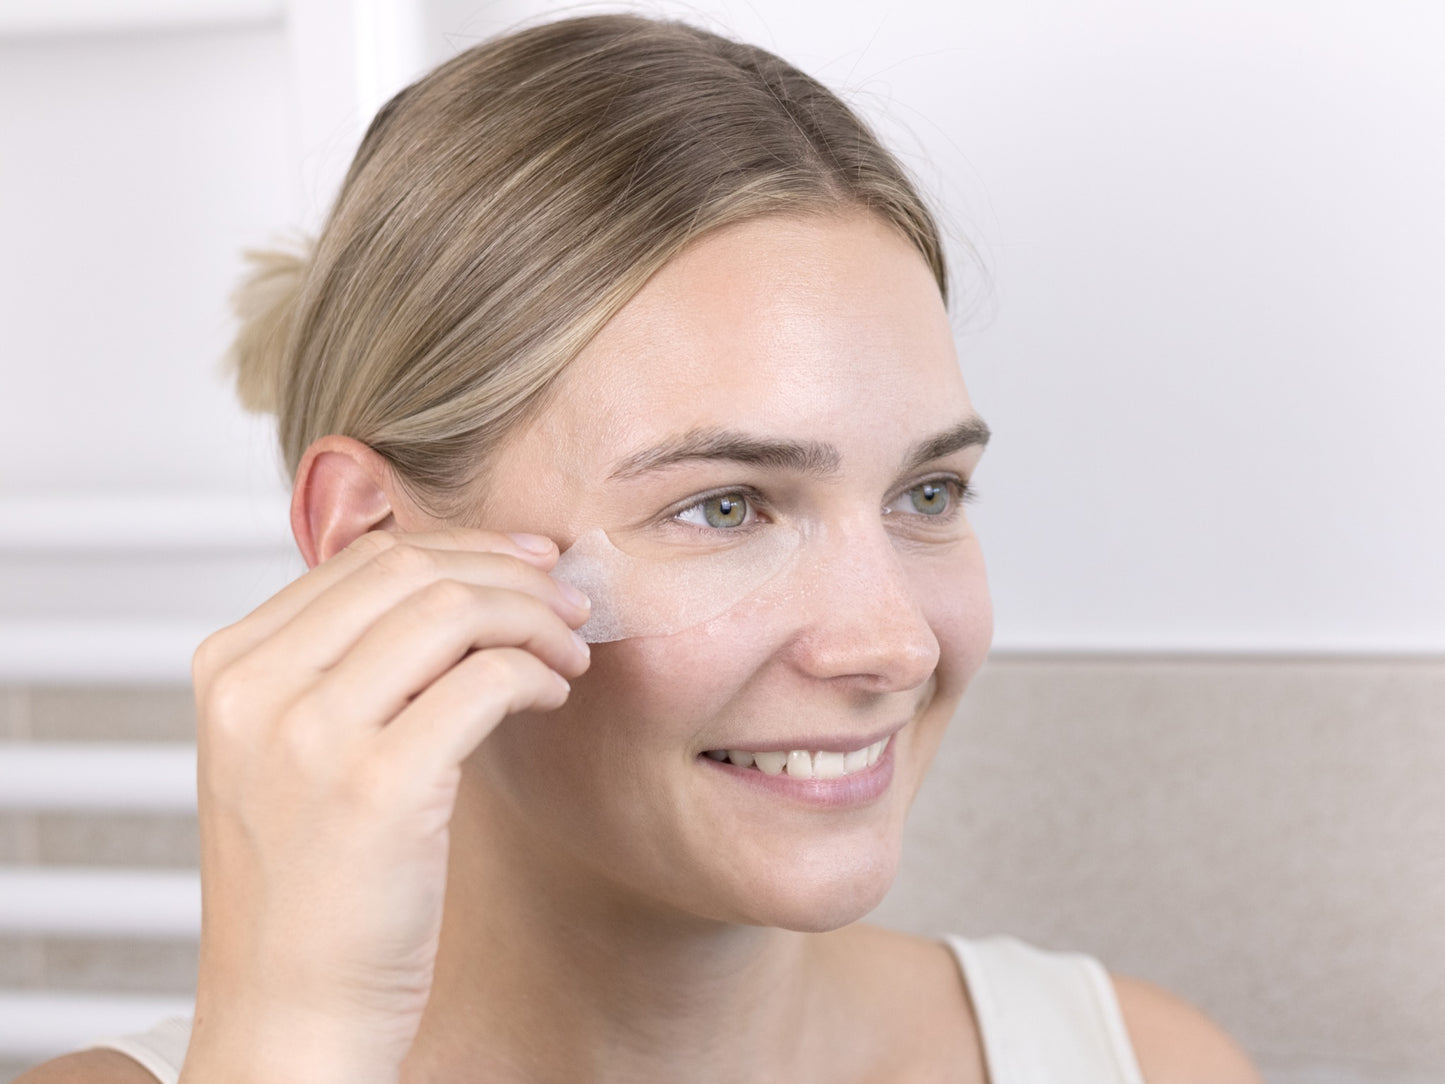 UPDATE EYE CONTOUR lifting patches